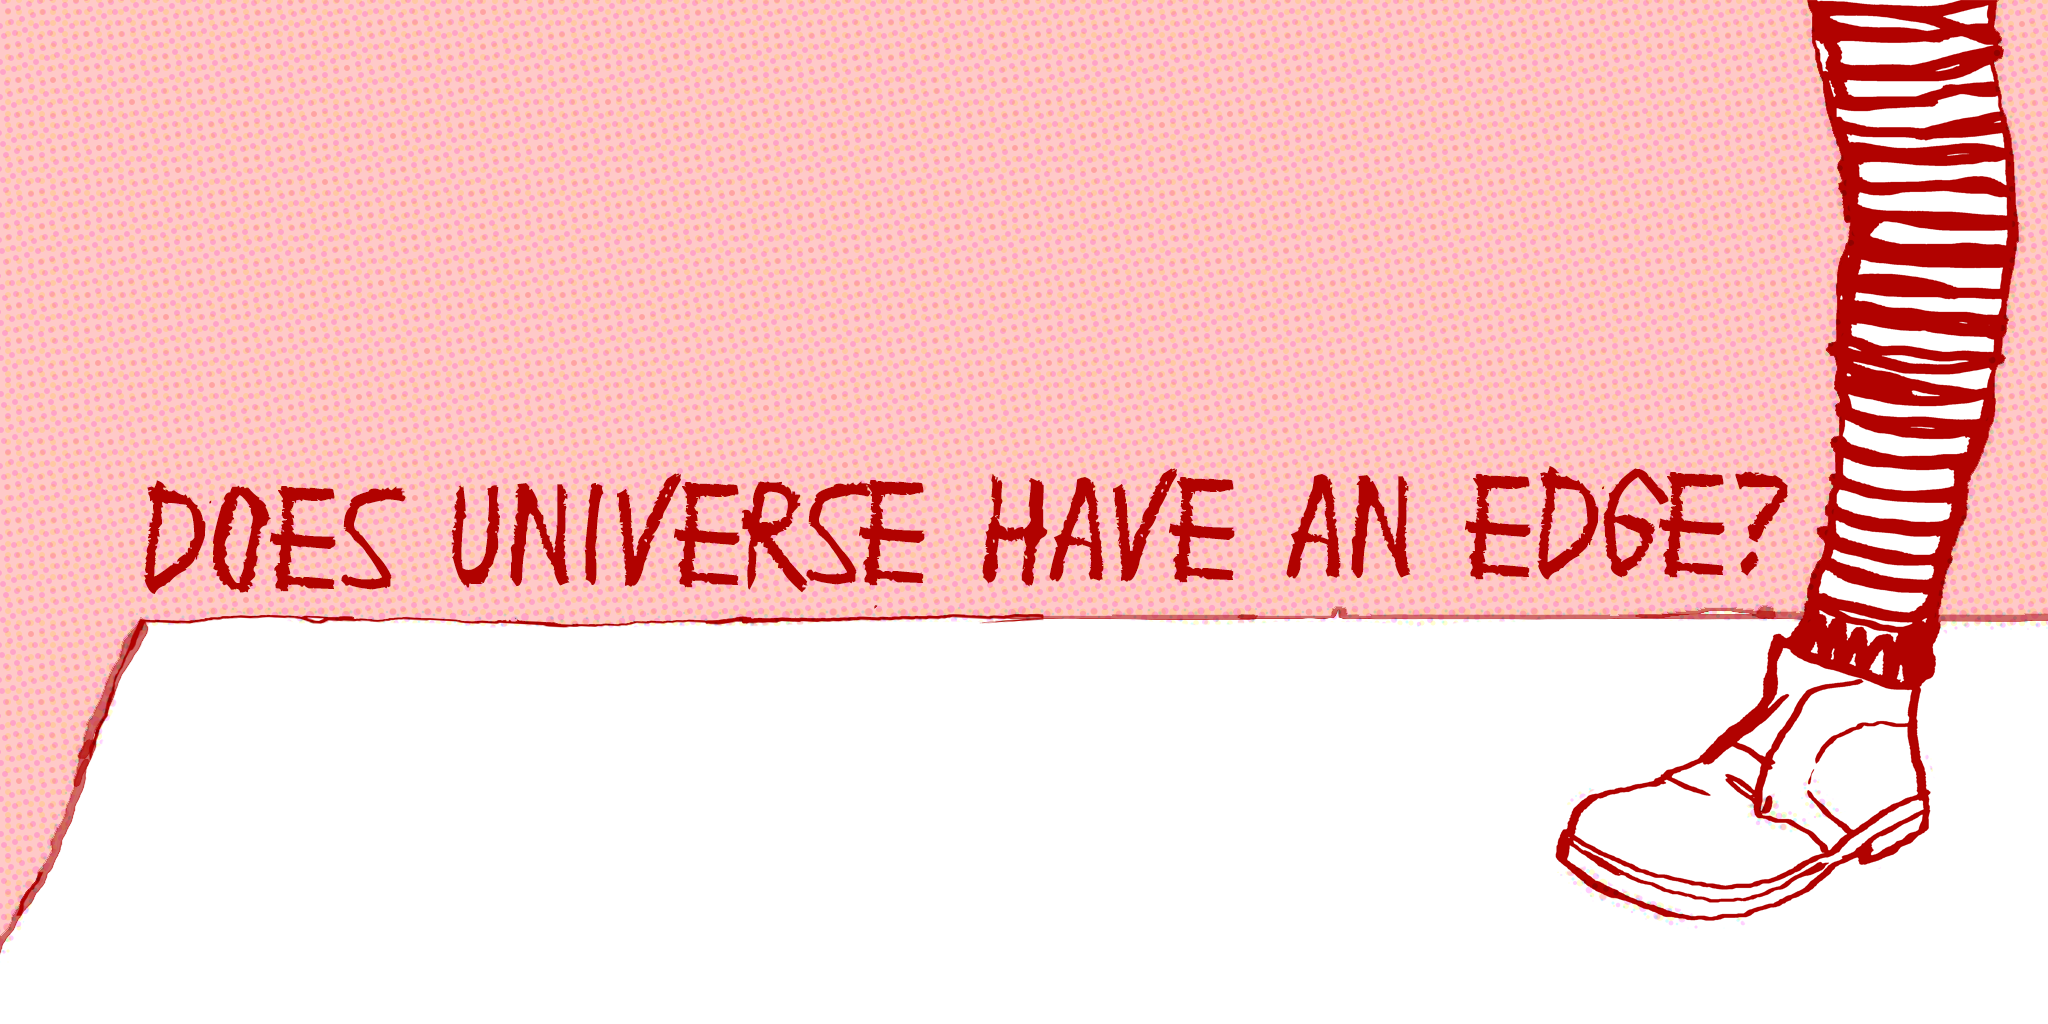 Does universe have an edge?